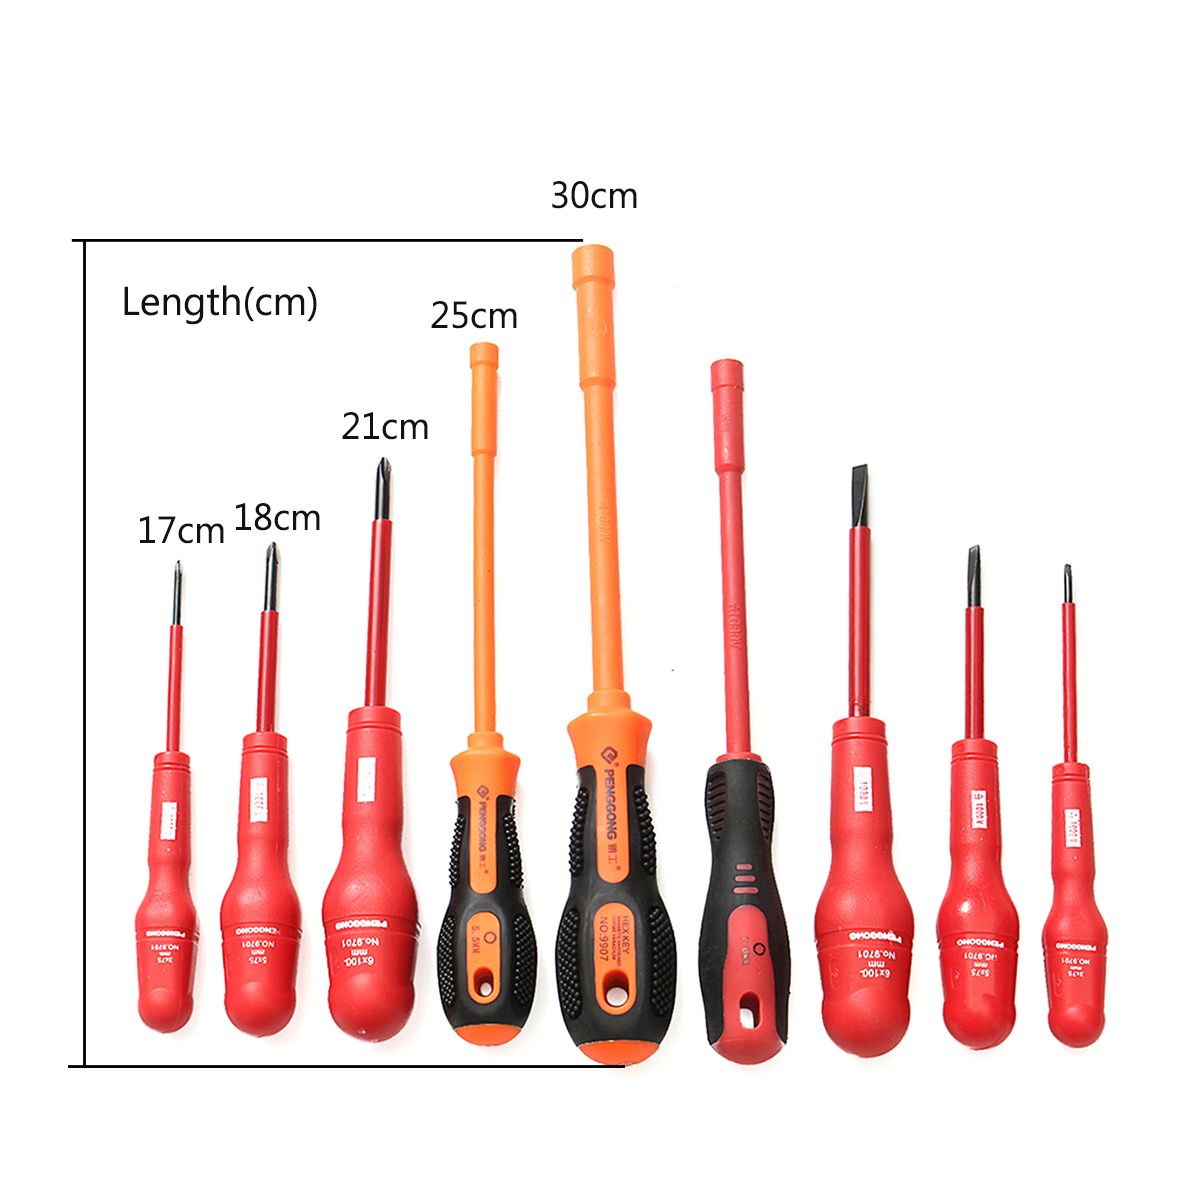 Insulated-Electrical-Screwdriver-Set-9PCS-Insulated-Magnetic-Tipped-Screwdrivers-Repair-Tool-Kit-1295176